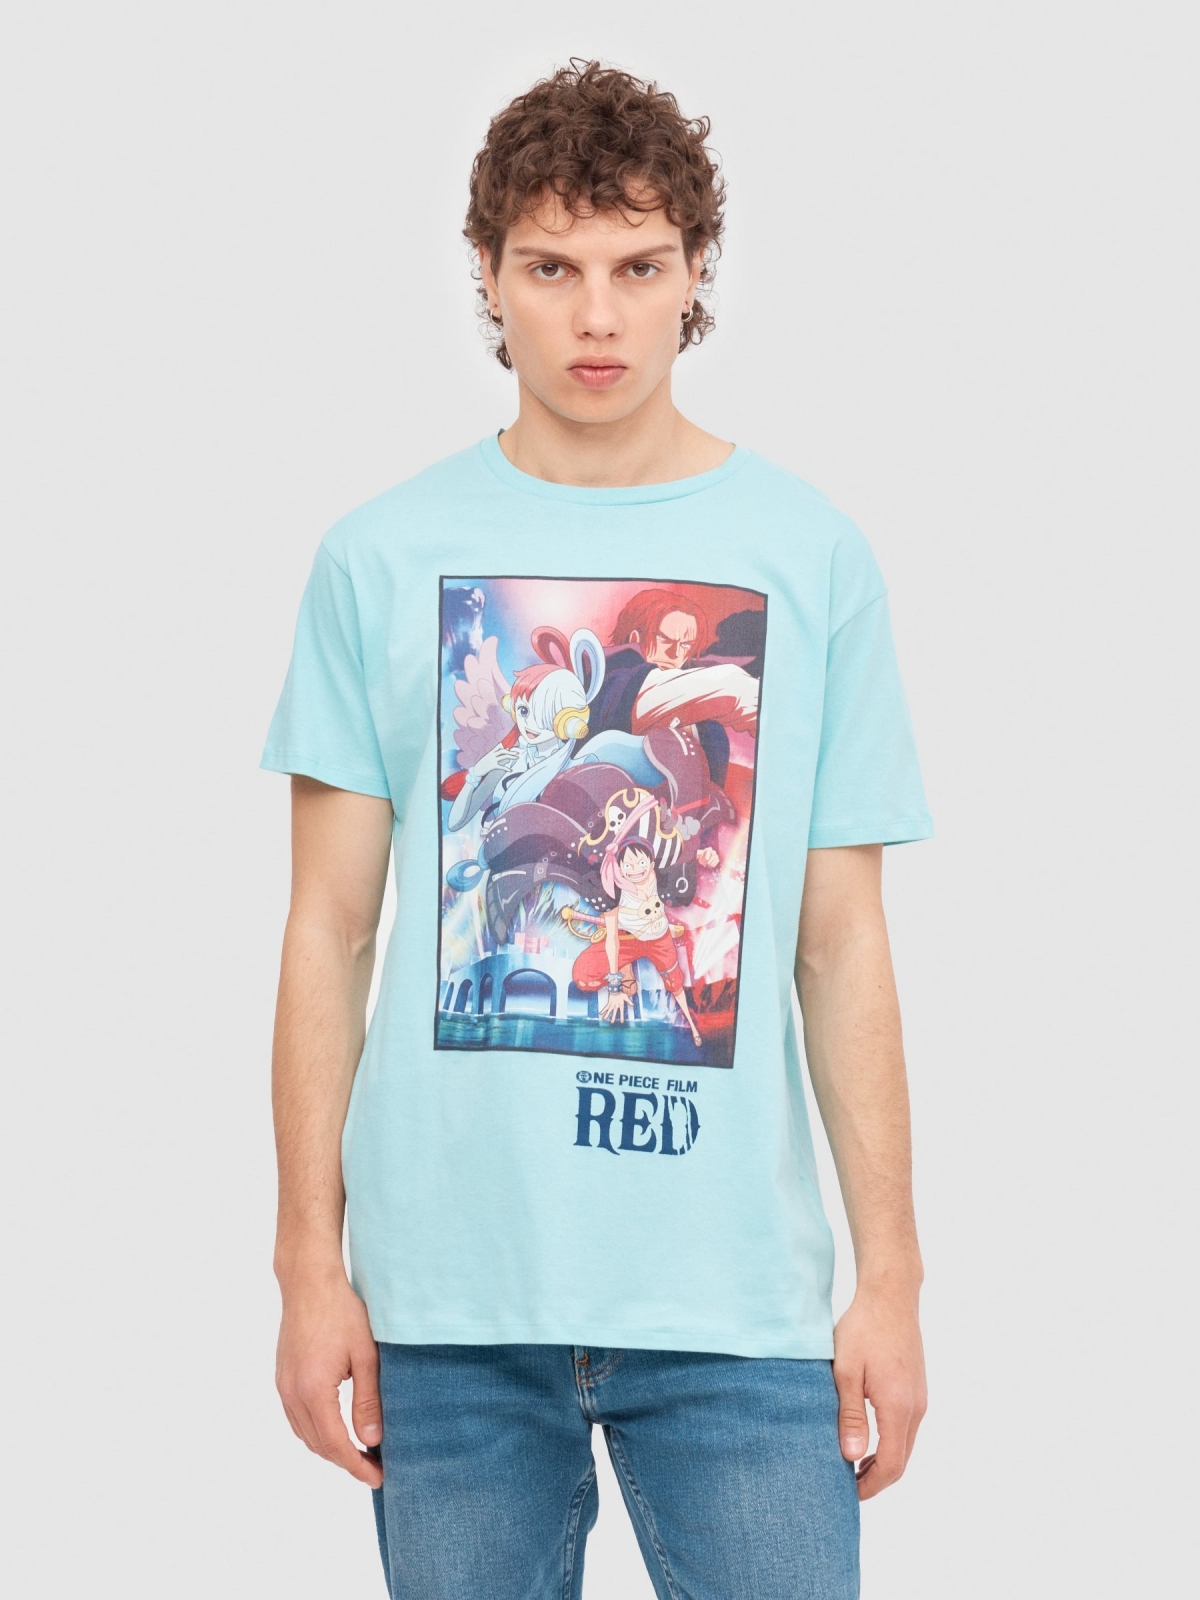 One Piece Film T-Shirt light blue middle front view